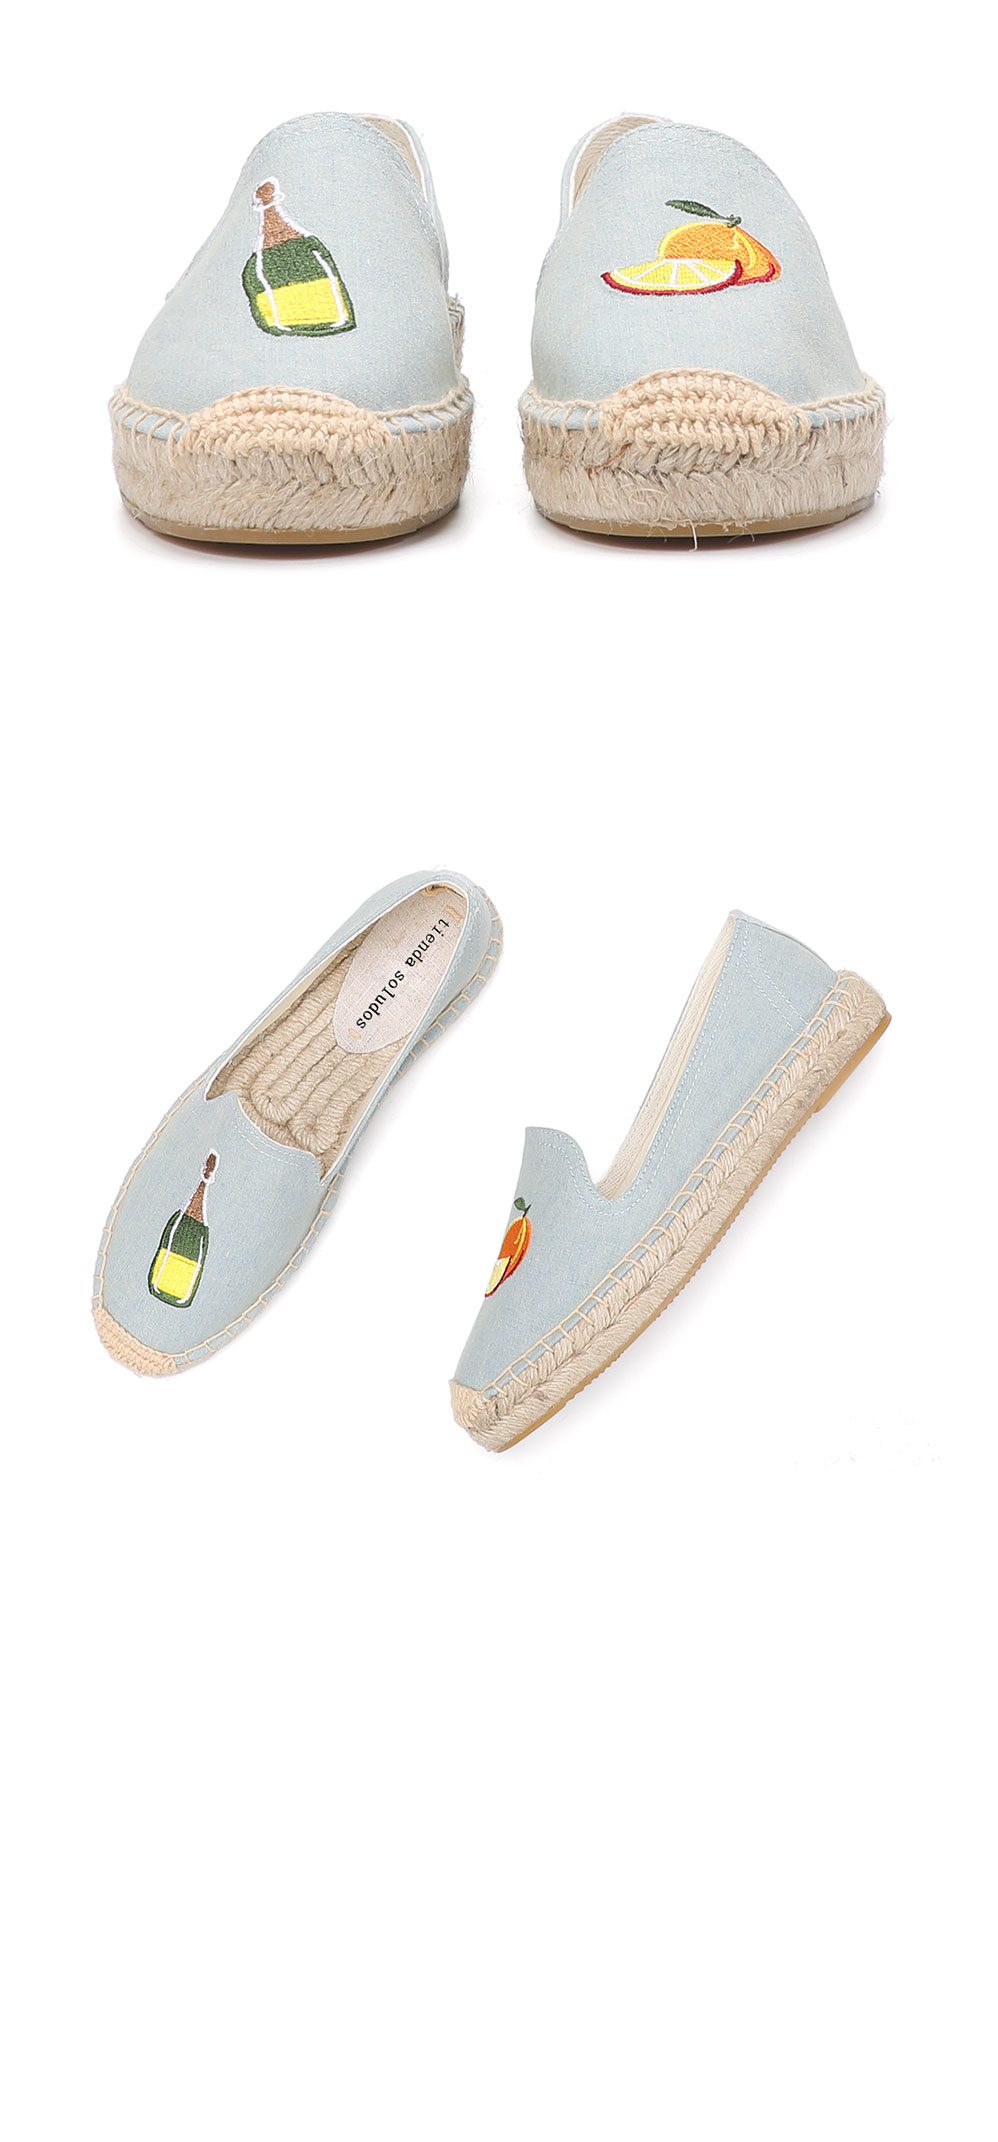 2021 Rushed New Flat Platform Hemp Rubber Slip-on Casual Spring/autumn Zapatillas Mujer Sapatos Womens Espadrilles Shoes